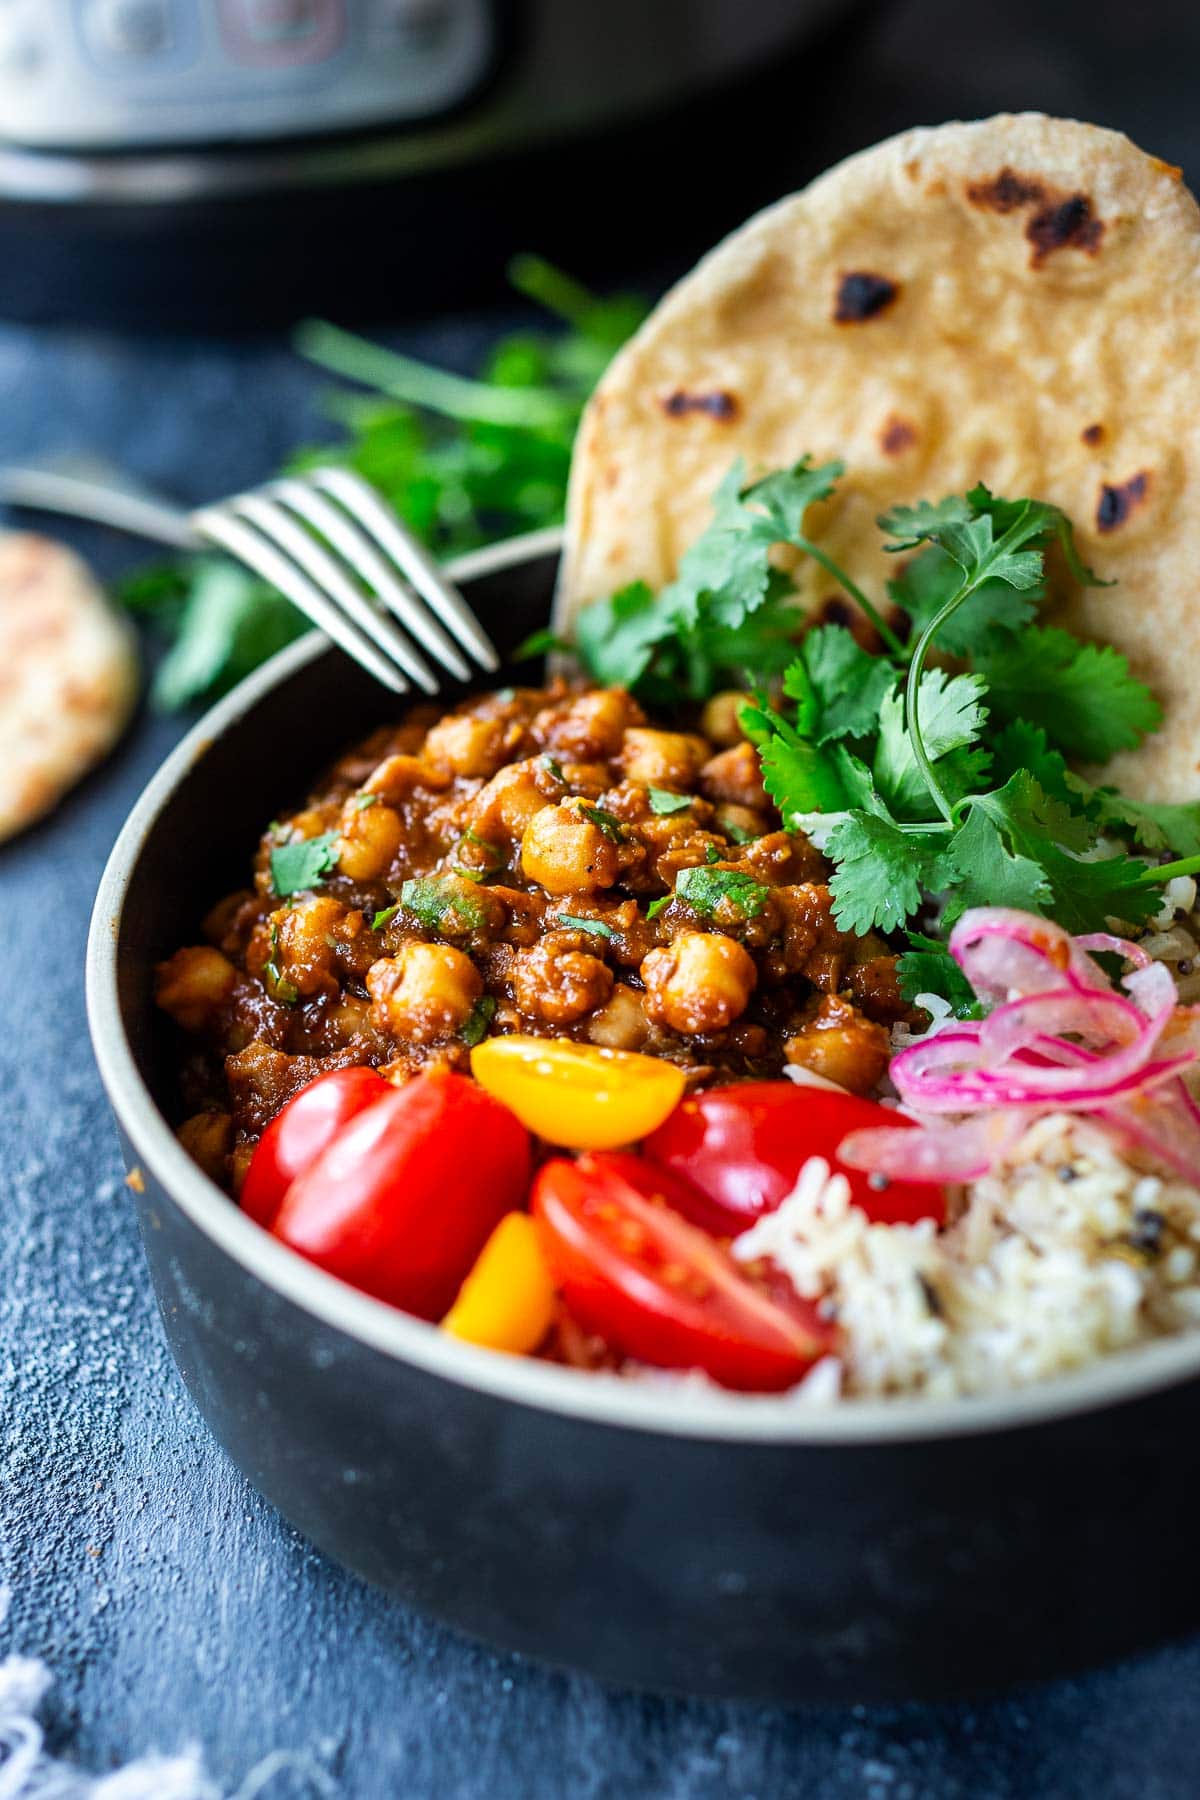 Chana masala in a bowl with rice and naan.